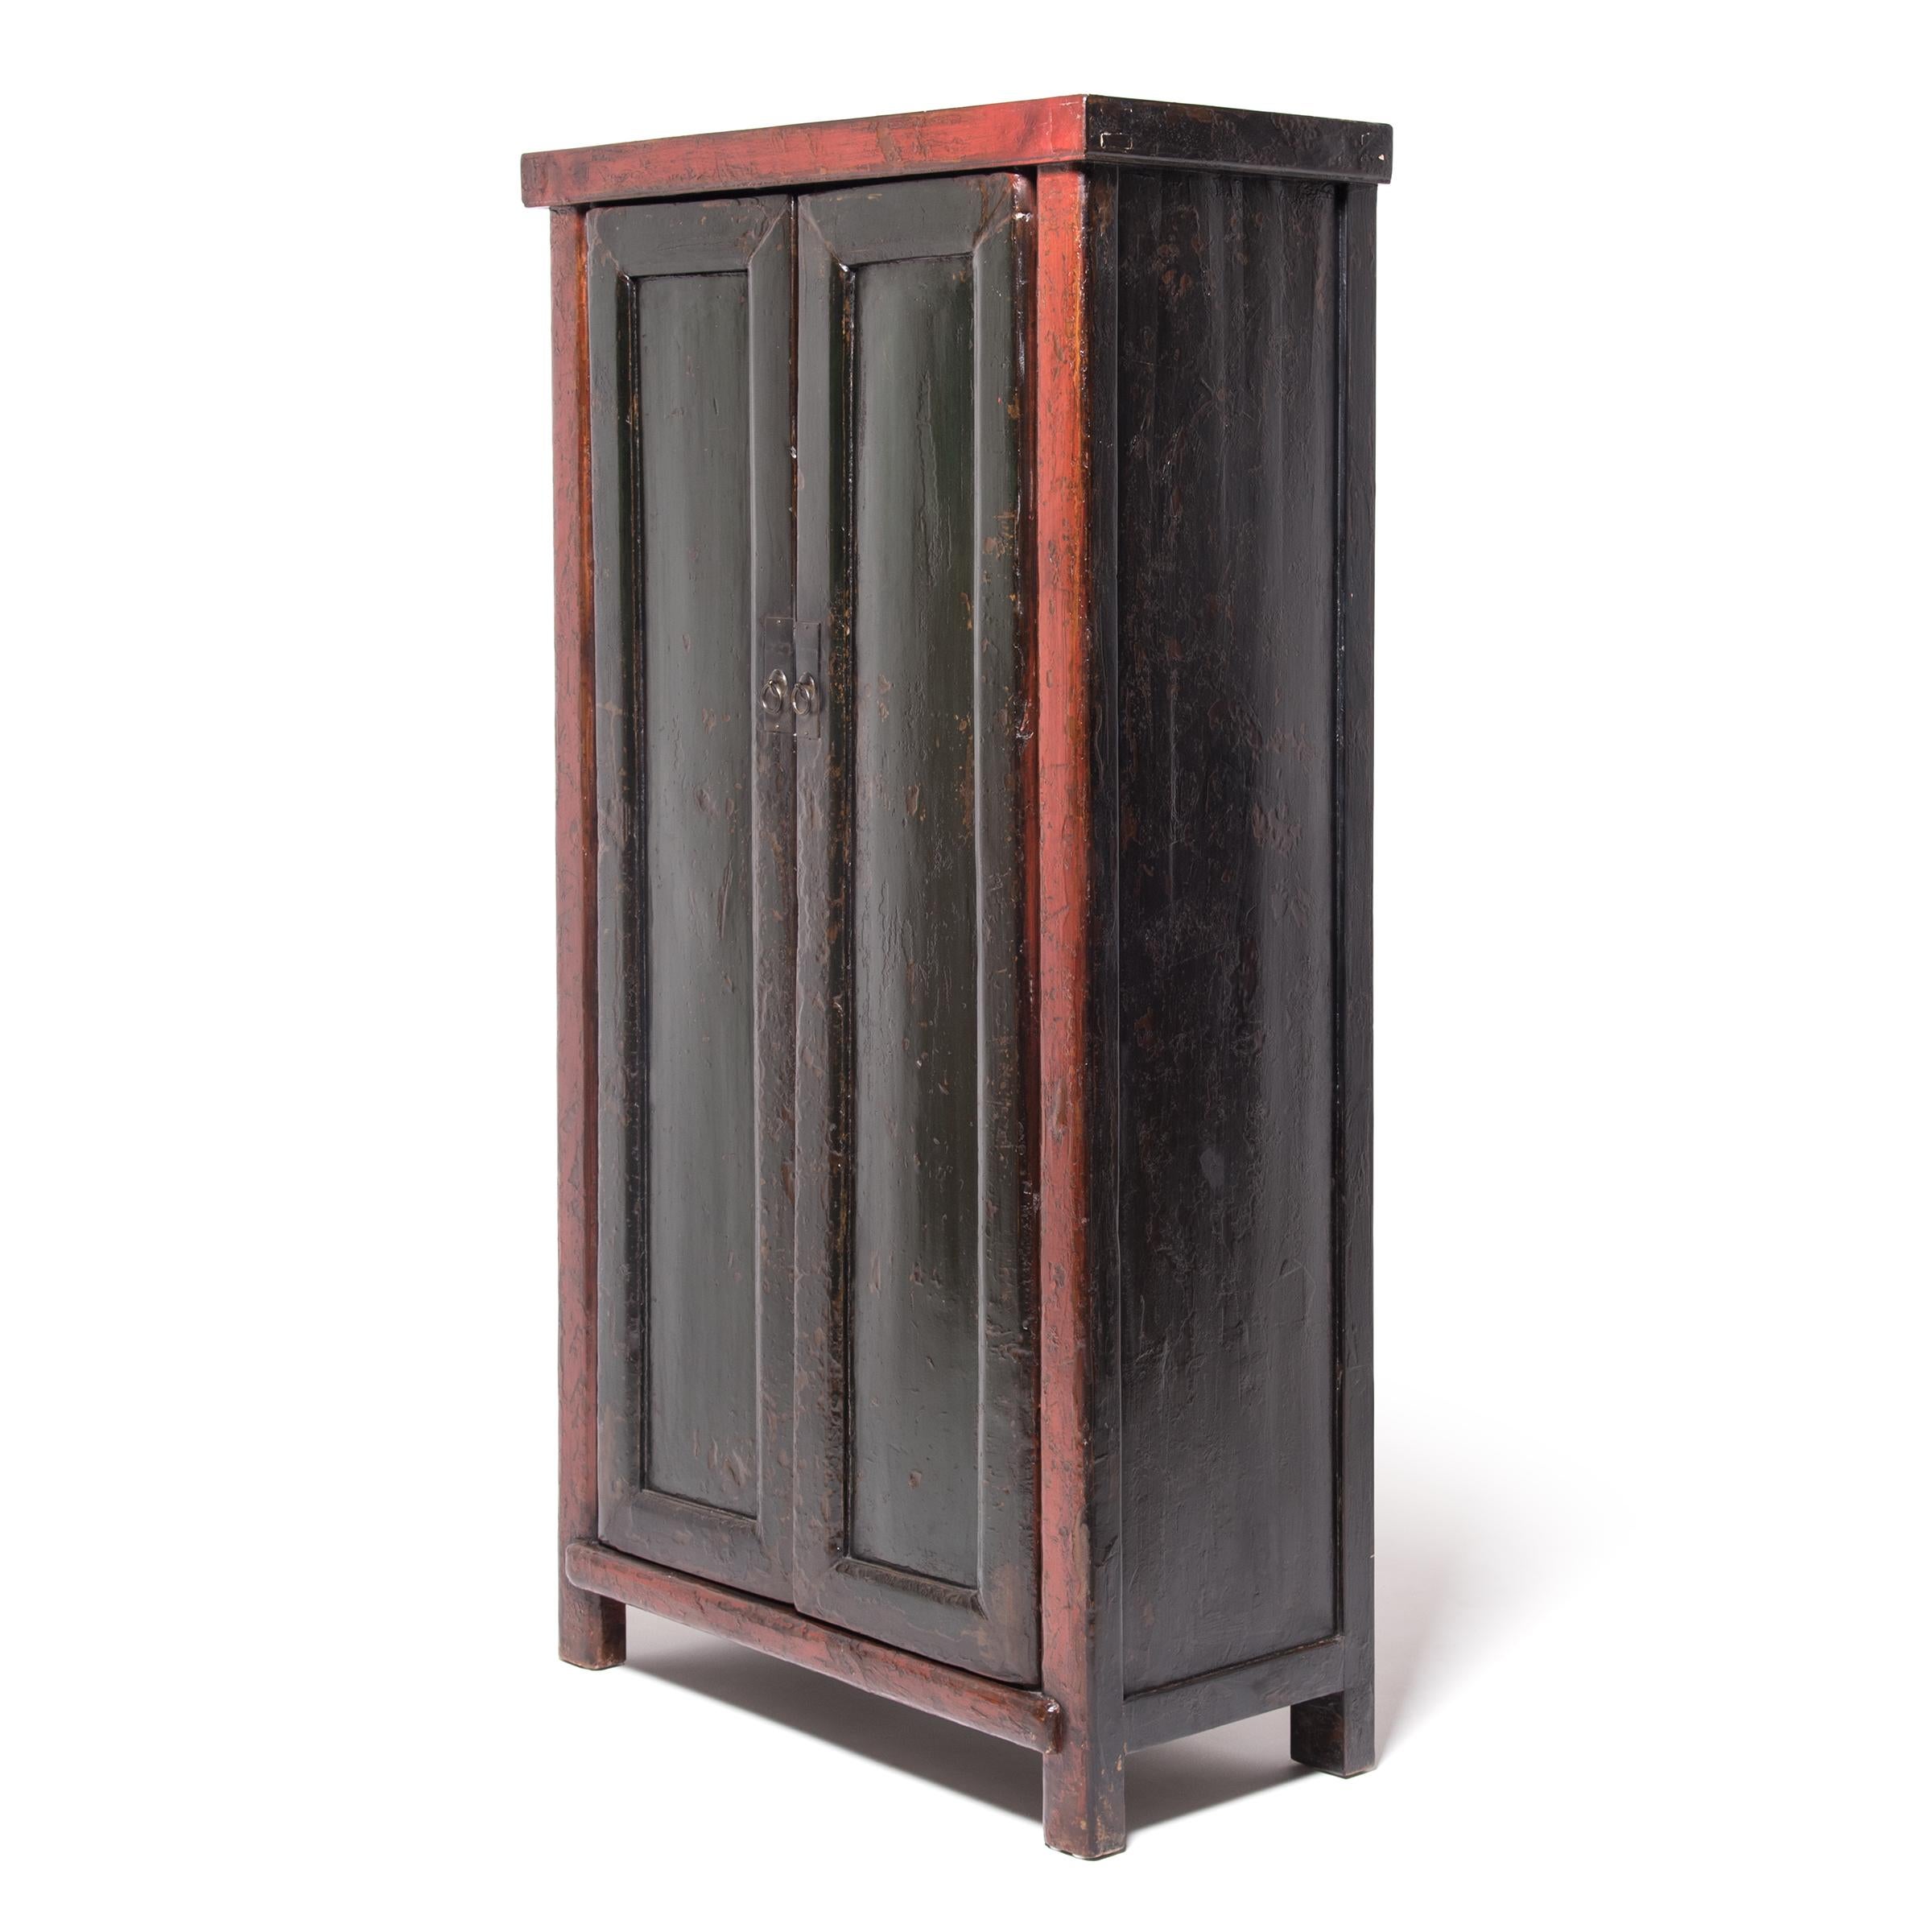 Qing Chinese Red & Black Lacquer Cabinet, c. 1850